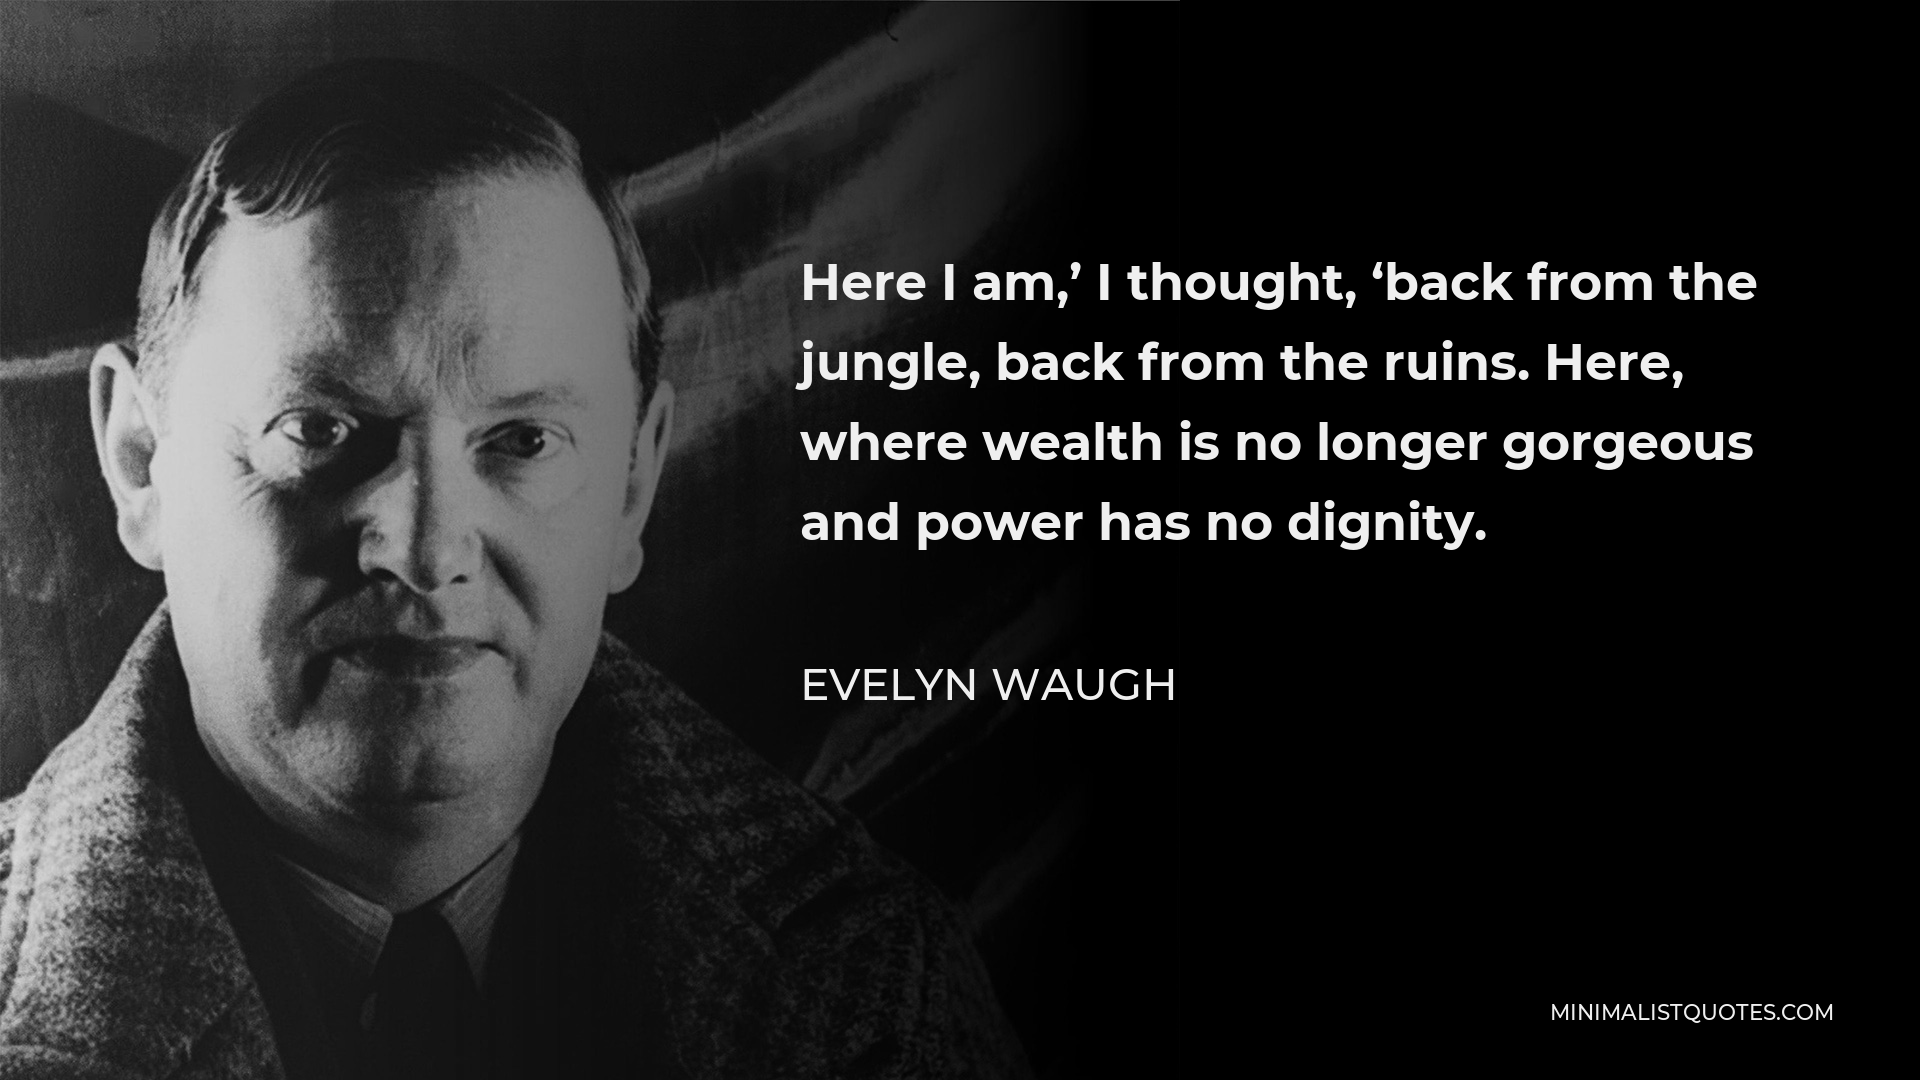 Evelyn Waugh Quote - Here I am,’ I thought, ‘back from the jungle, back from the ruins. Here, where wealth is no longer gorgeous and power has no dignity.